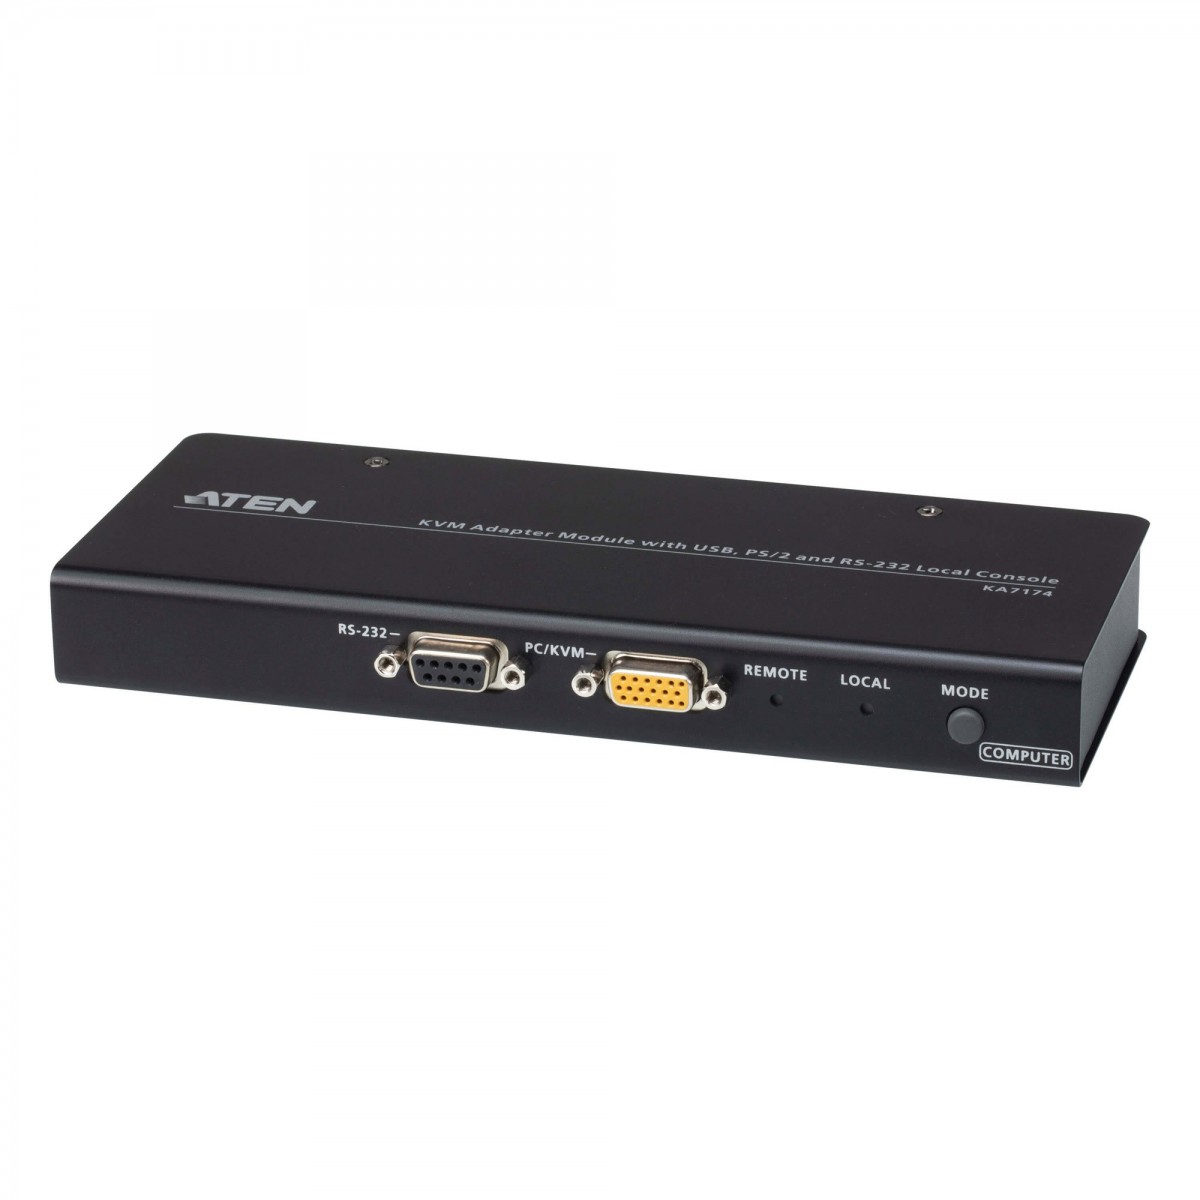 ATEN KVM Adapter Module with USB - PS-2 - and RS-232 Local Console - 1920 x 1200 pixels - Ethernet LAN - WUXGA - 1.75 W - Black